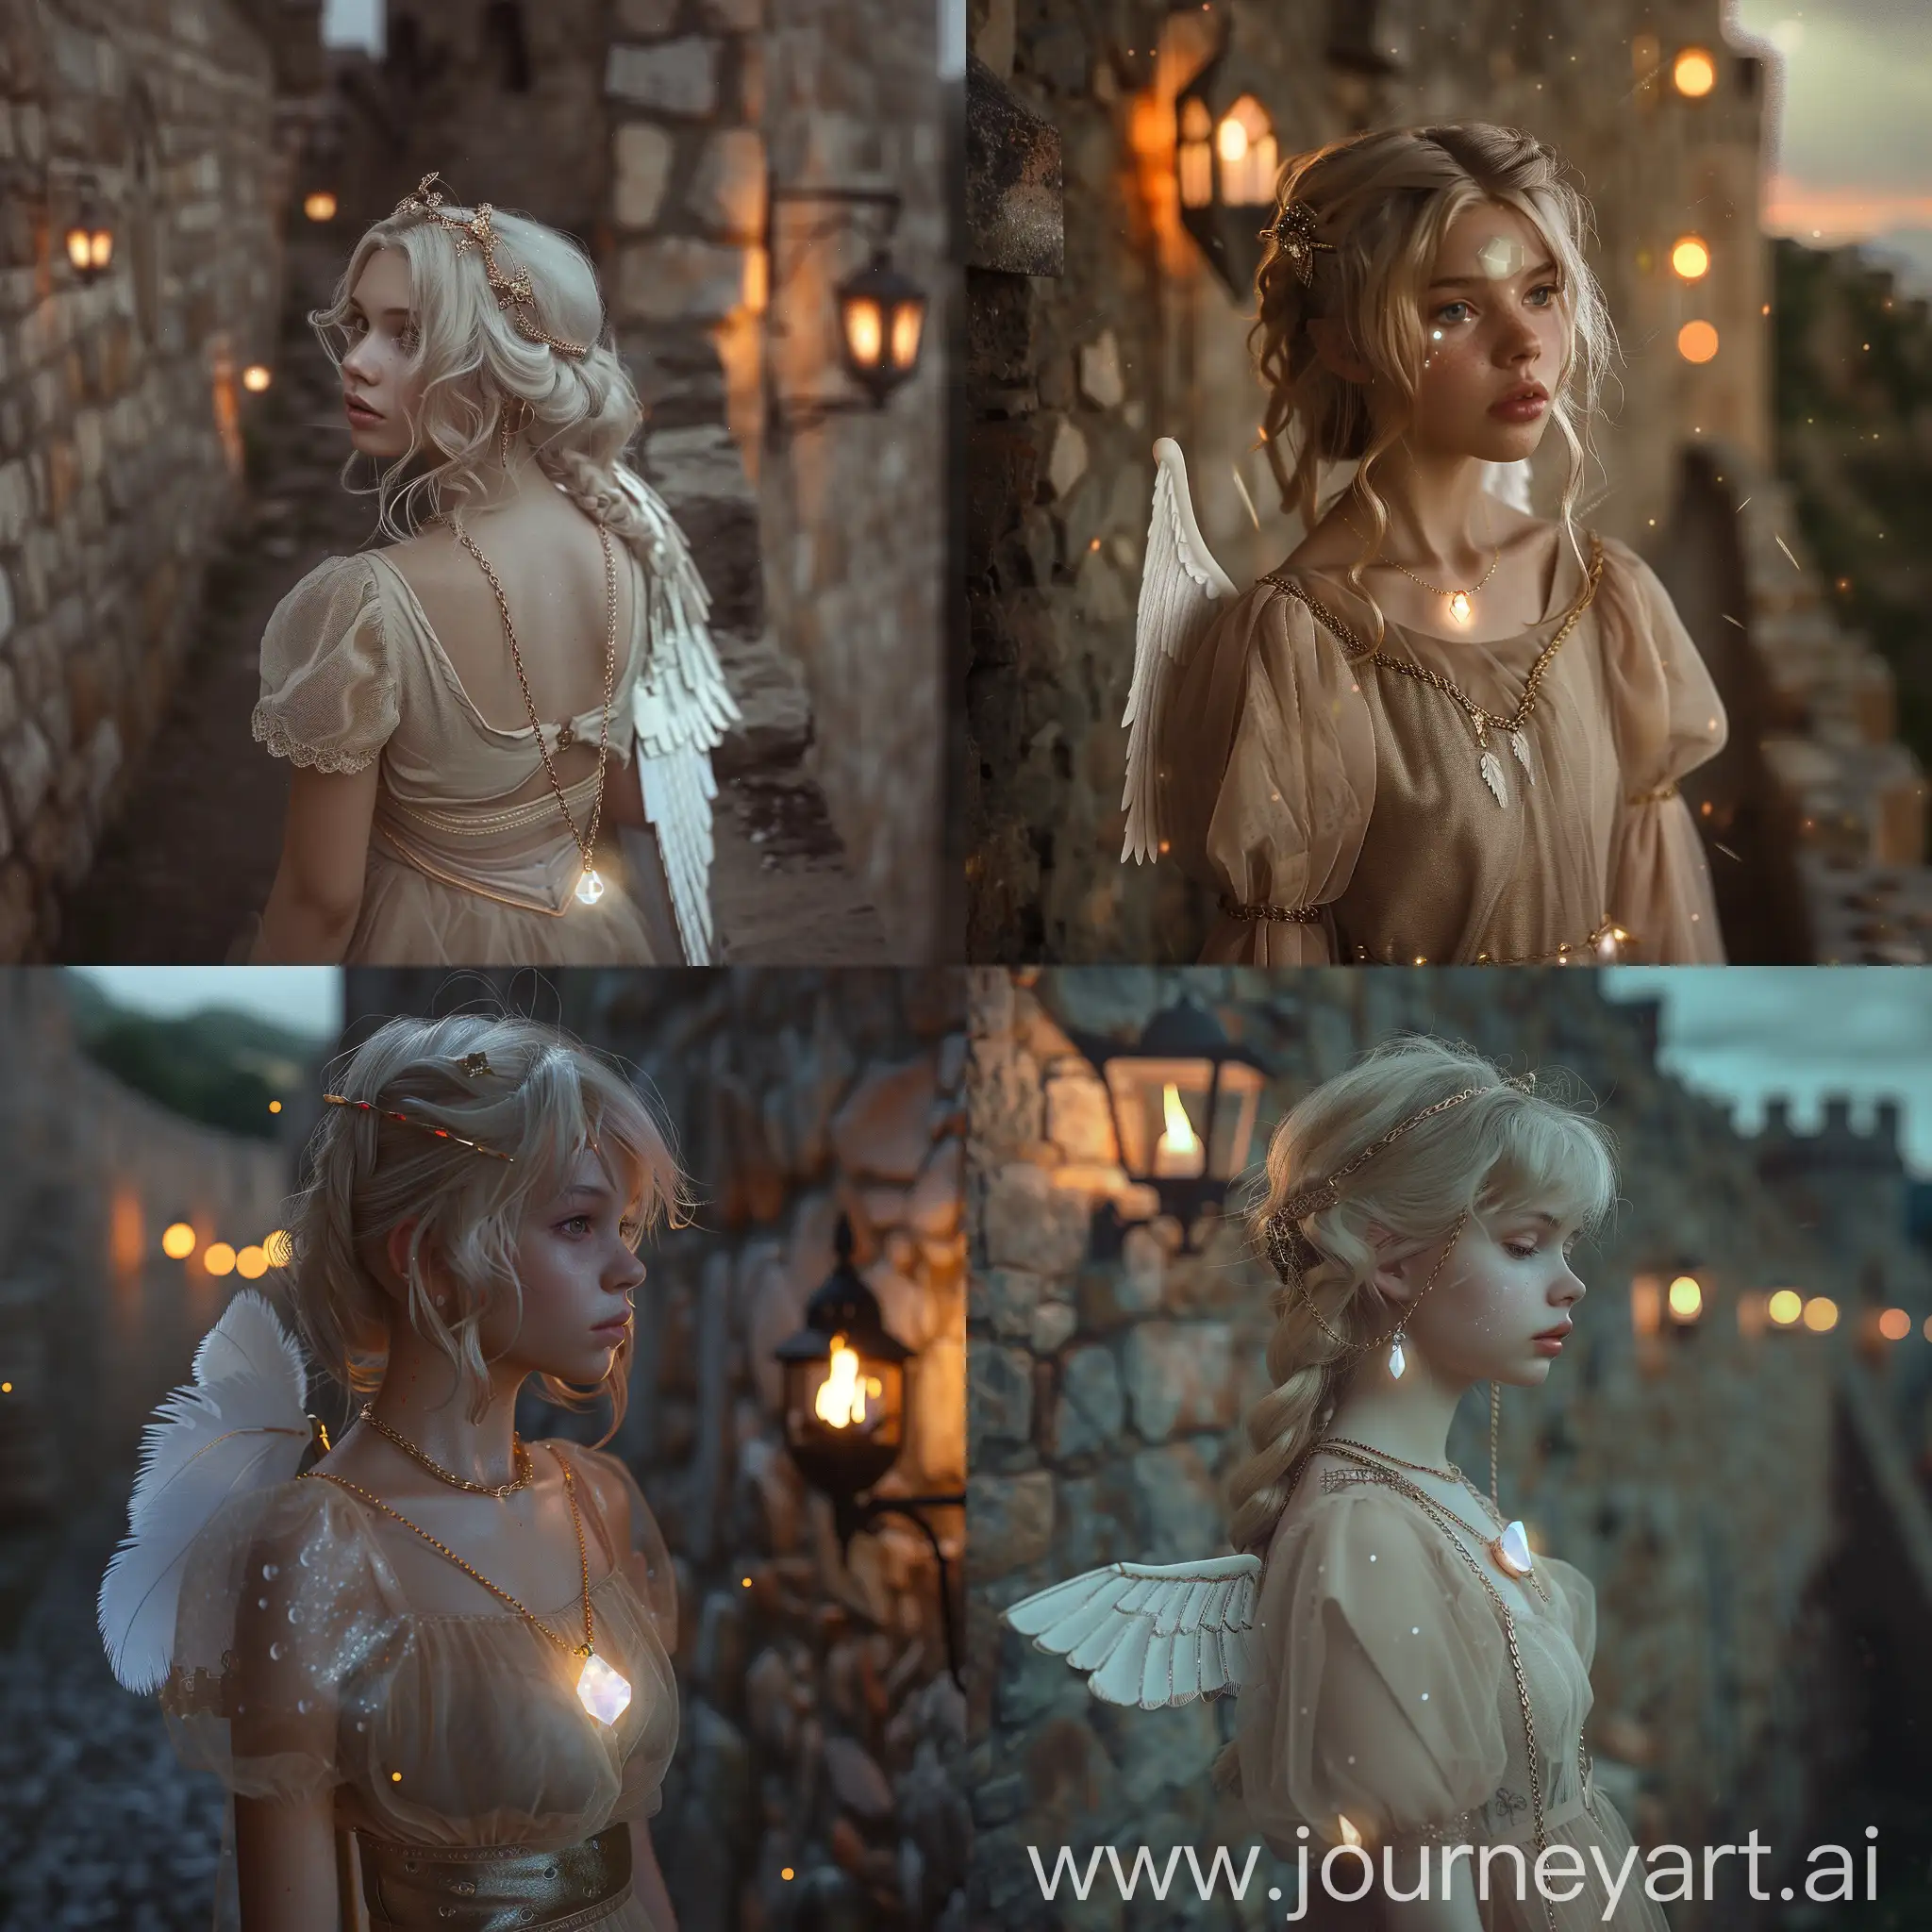 Enchanting-Blonde-Angel-with-Glowing-Crystal-Necklace-at-Medieval-Castle